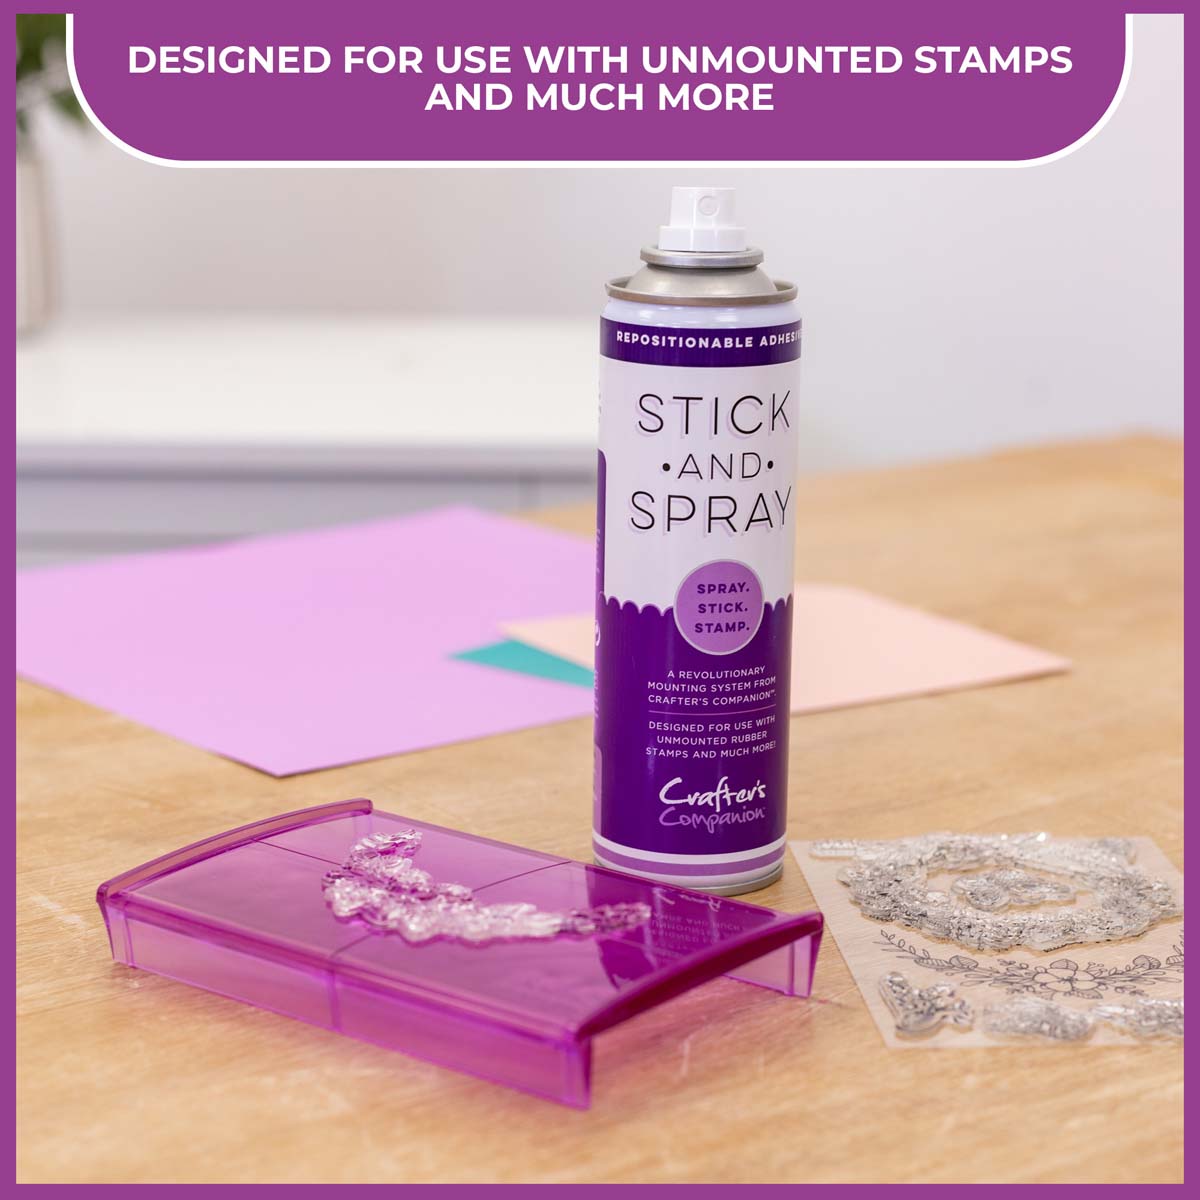 Crafter's Companion - Stick and Spray Mounting Adhesive (PURPLE CAN)